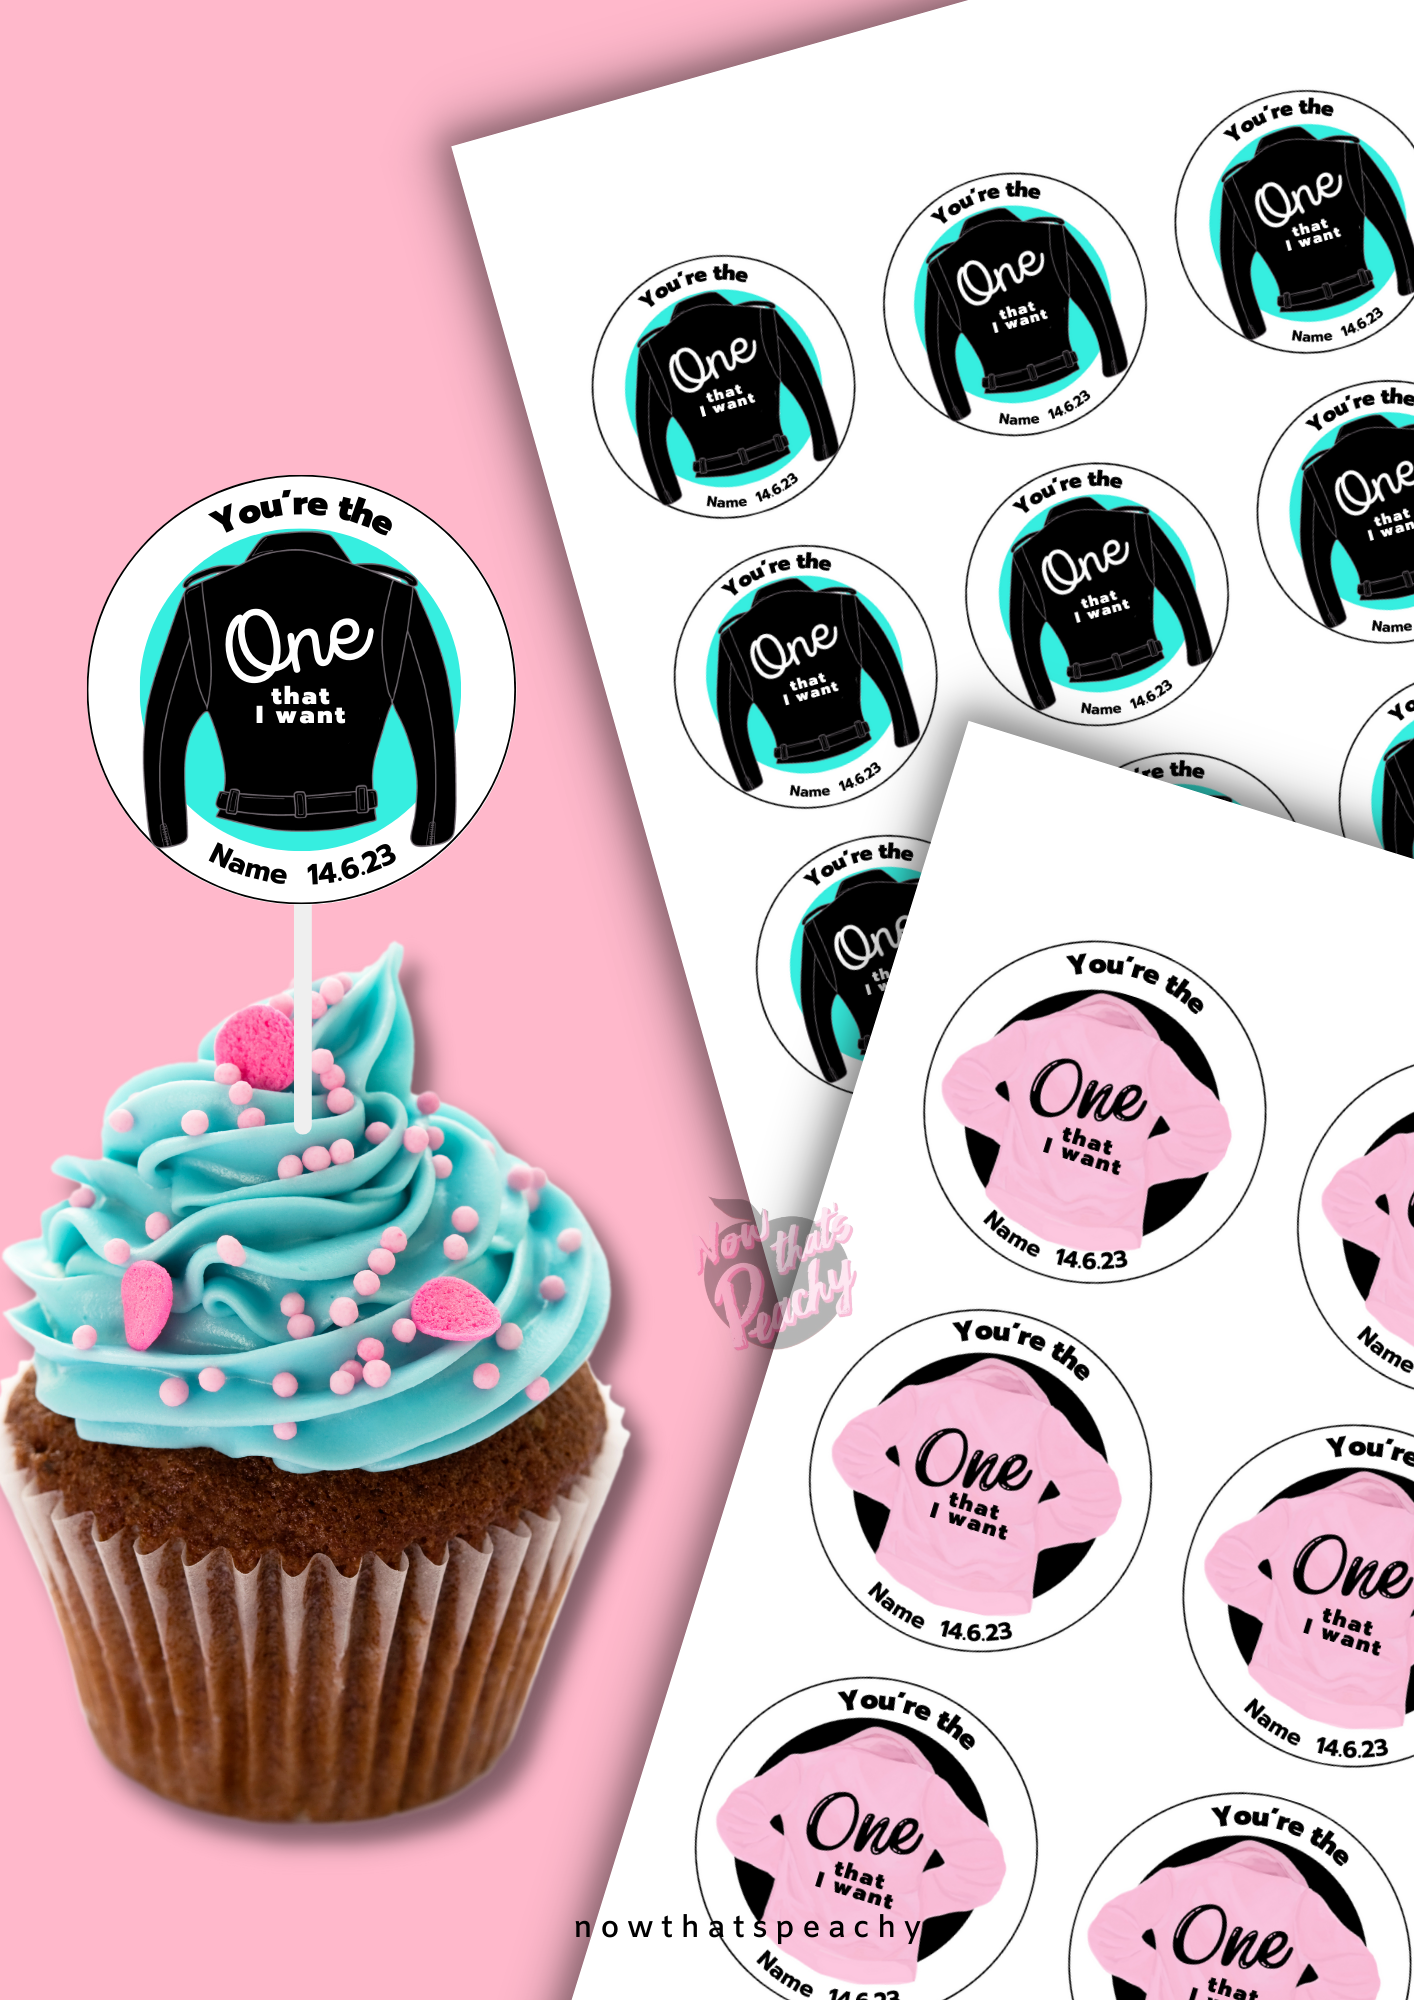 1st B'day Grease Favor Sticker circles PRINTABLE Pink Ladies T-birds Party decor tags labels cake topper DIY 50s themed ONE Birthday greaser Rock'n'roll Sock Hop Retro 50s fifties Soda hop Jukebox instant digital download